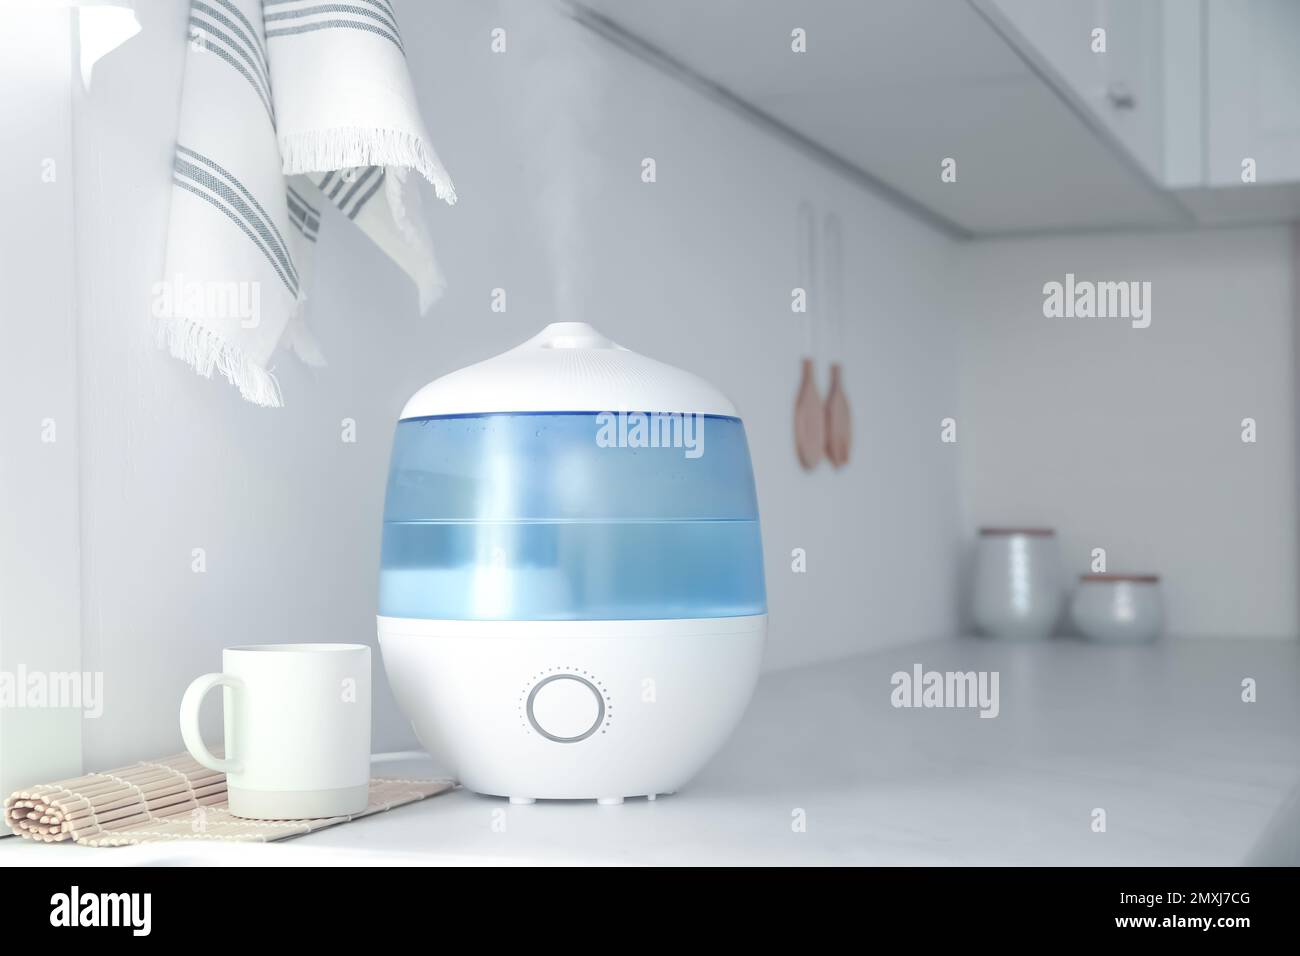 https://c8.alamy.com/comp/2MXJ7CG/modern-air-humidifier-cup-and-bamboo-mat-on-counter-in-kitchen-space-for-text-2MXJ7CG.jpg